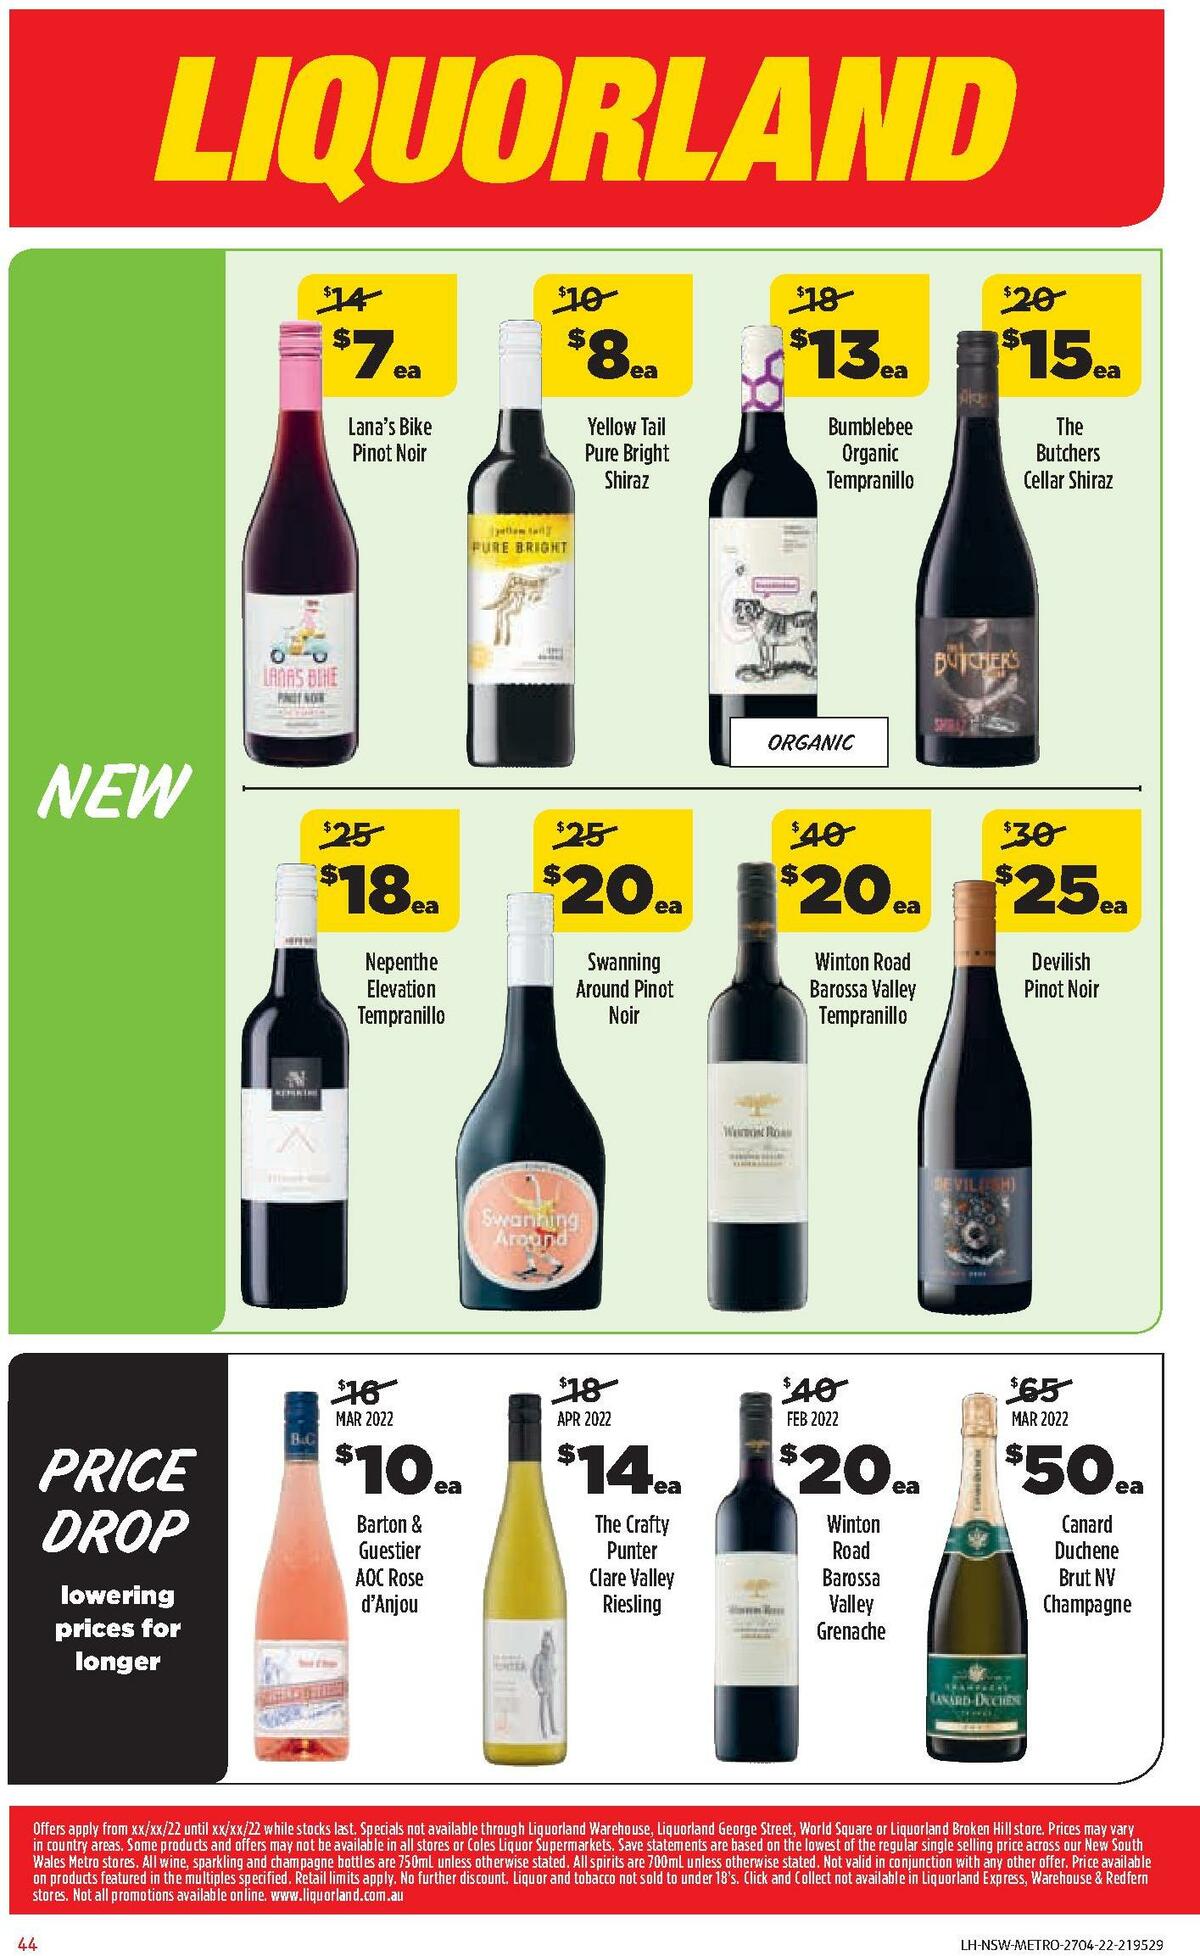 Coles Catalogues from 27 April